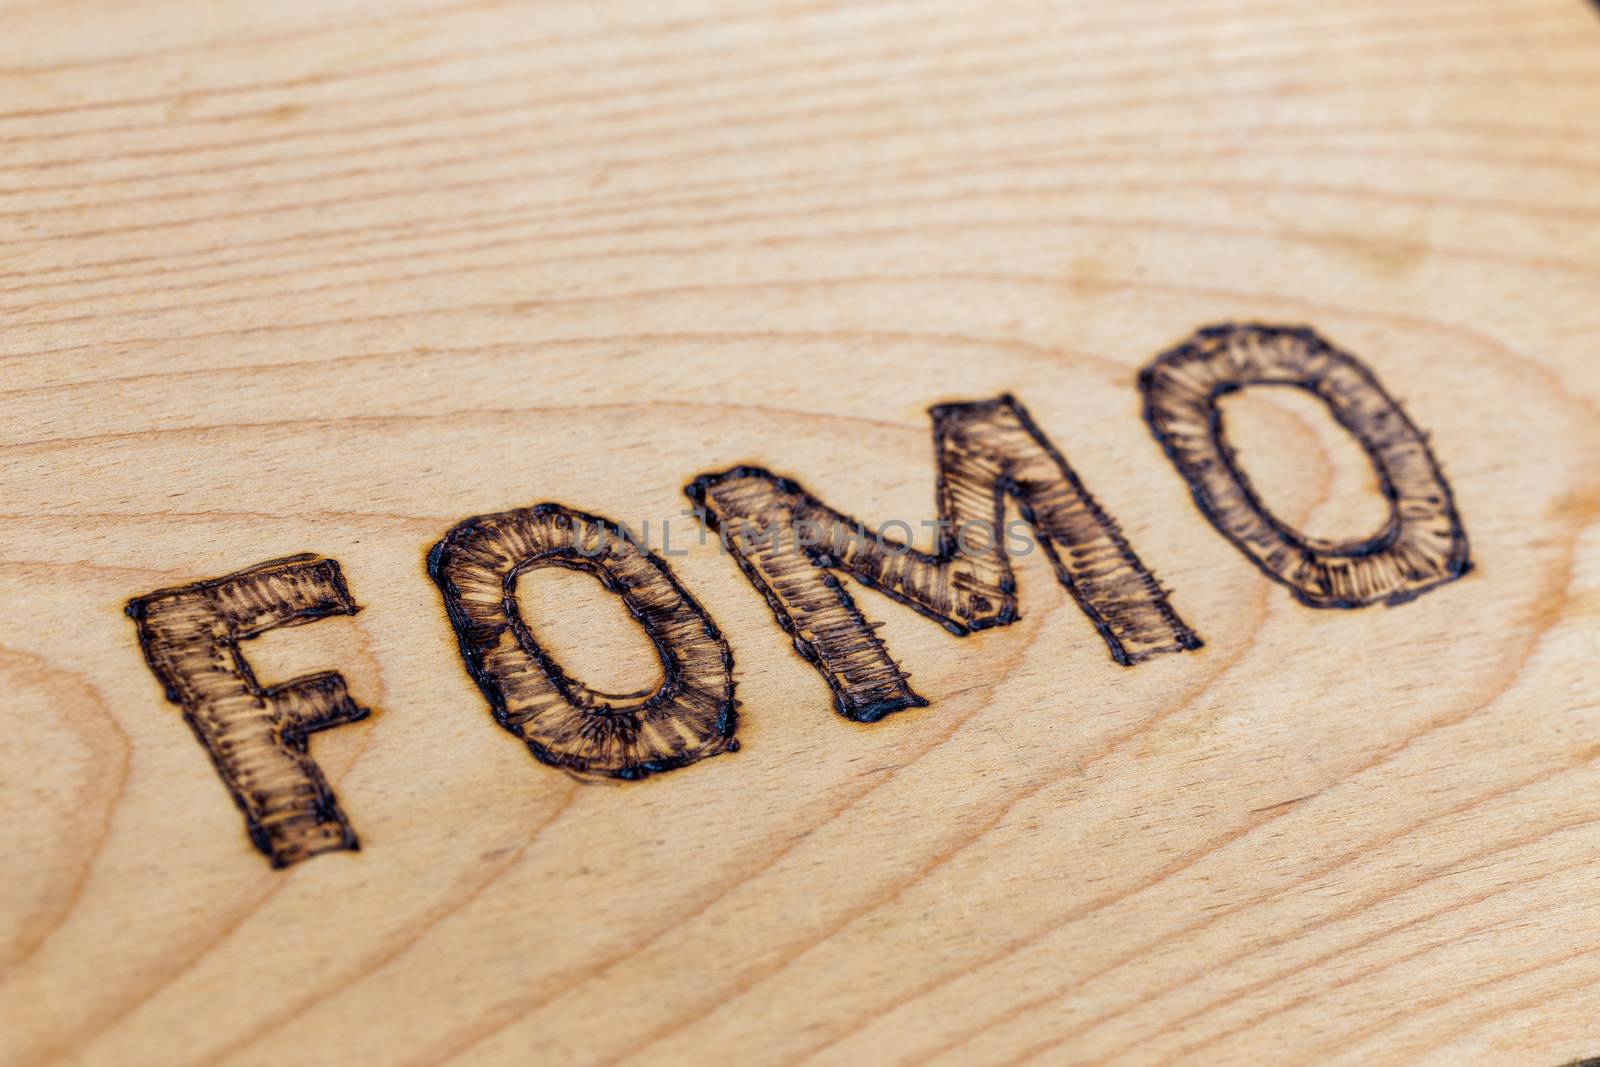 Abbreviation FOMO - fear of missing out - burnt by hand on flat wooden surface. Diagonal view with selective focus. by z1b